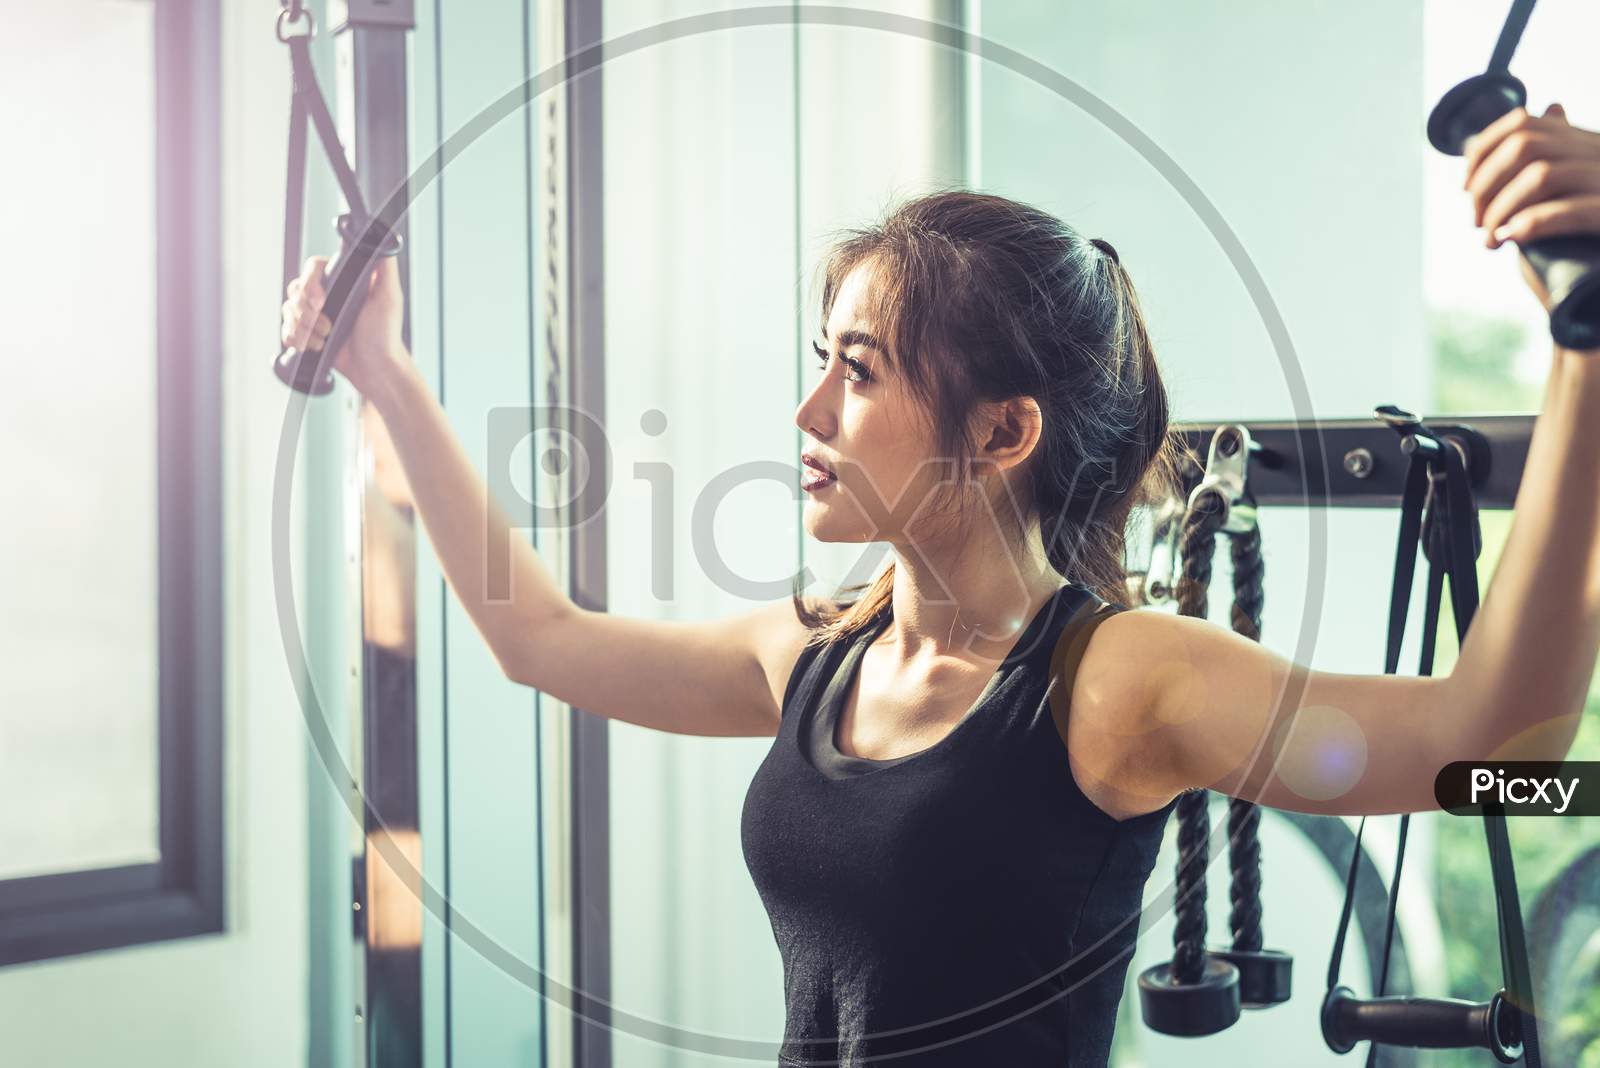 Asian Young Woman Doing Elastic Rope Exercises At Cross Fitness Gym. Strength Training And Muscular Beauty And Healthy Concept. Sport Equipment And Sport Club Center Theme.